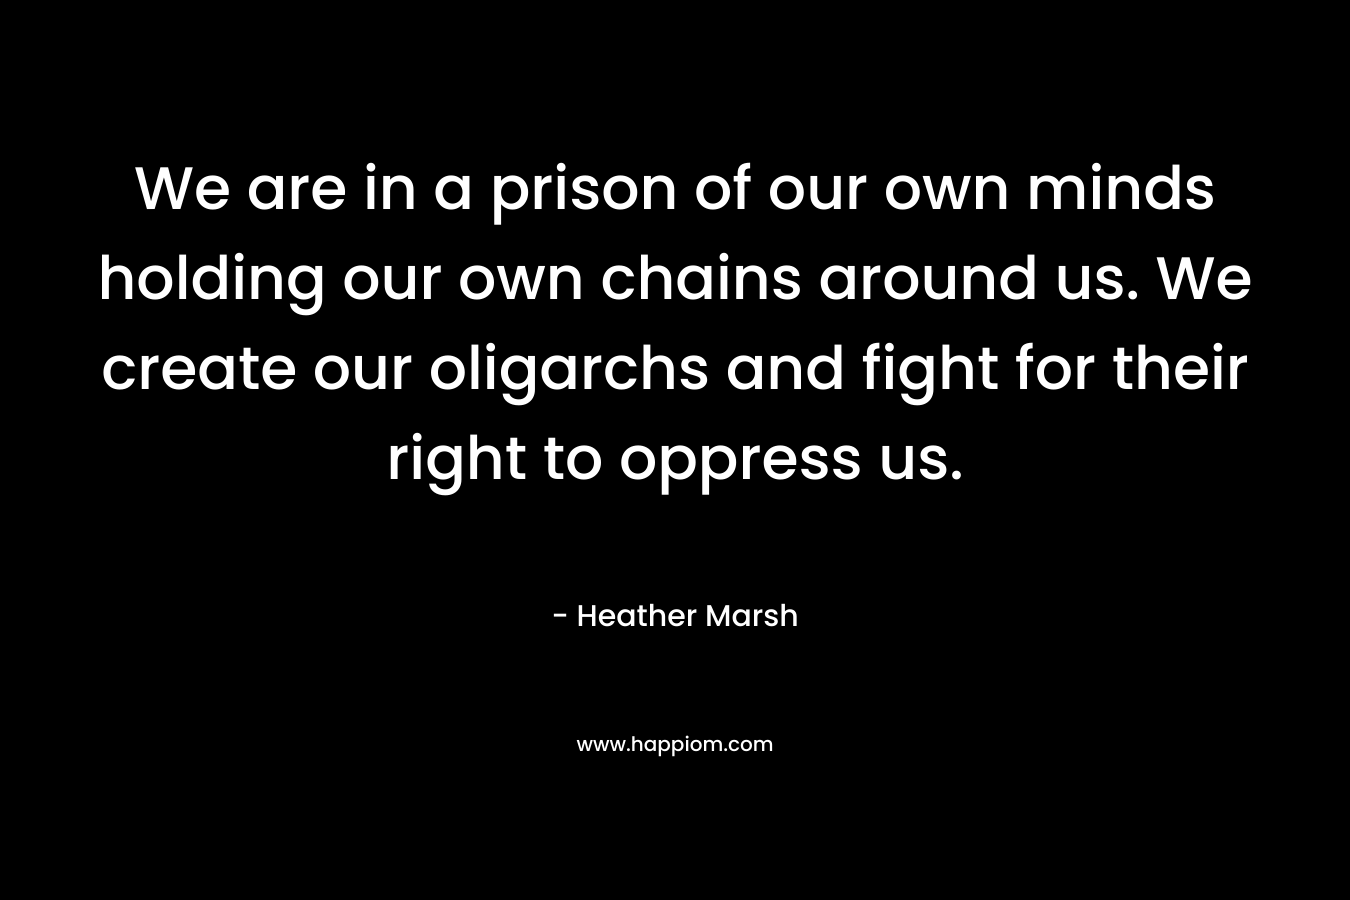 We are in a prison of our own minds holding our own chains around us. We create our oligarchs and fight for their right to oppress us.